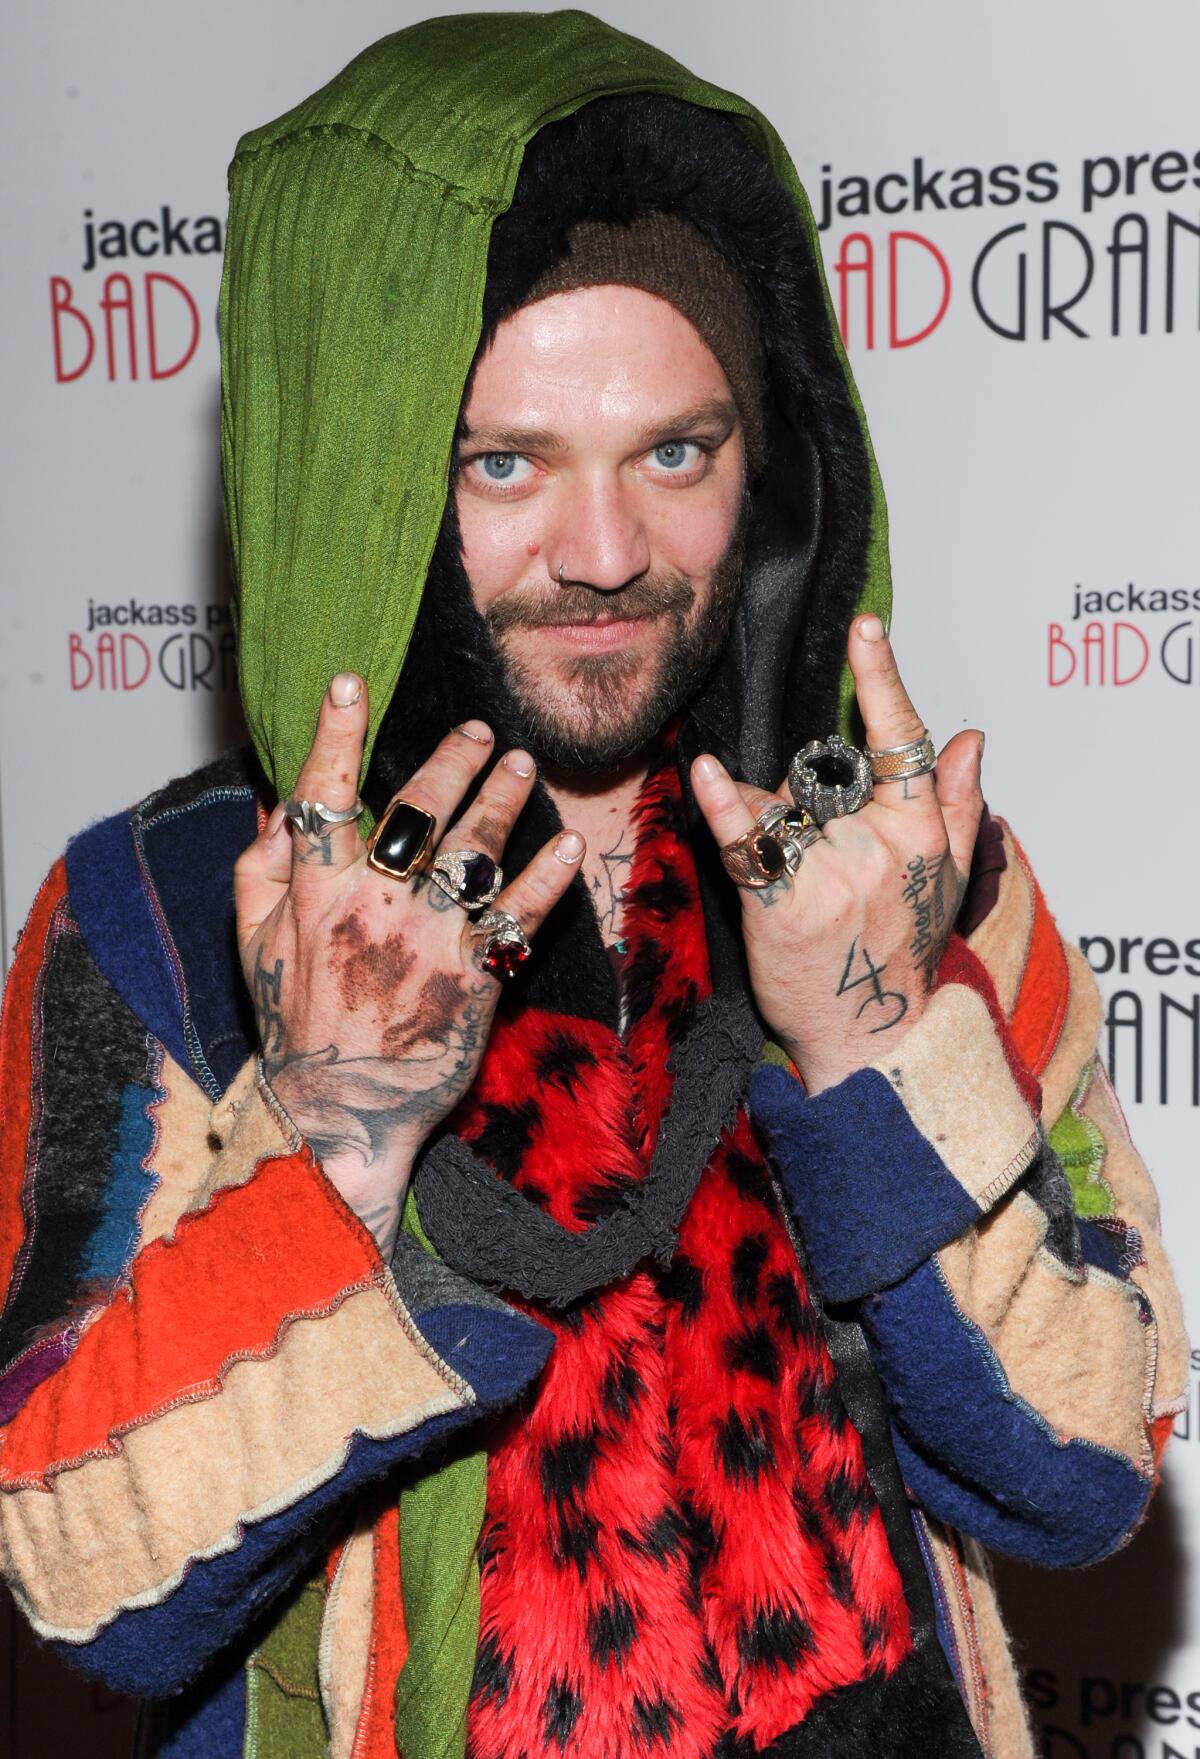 Bam Margera poses in layers of clothing and holds up his hands with many rings.